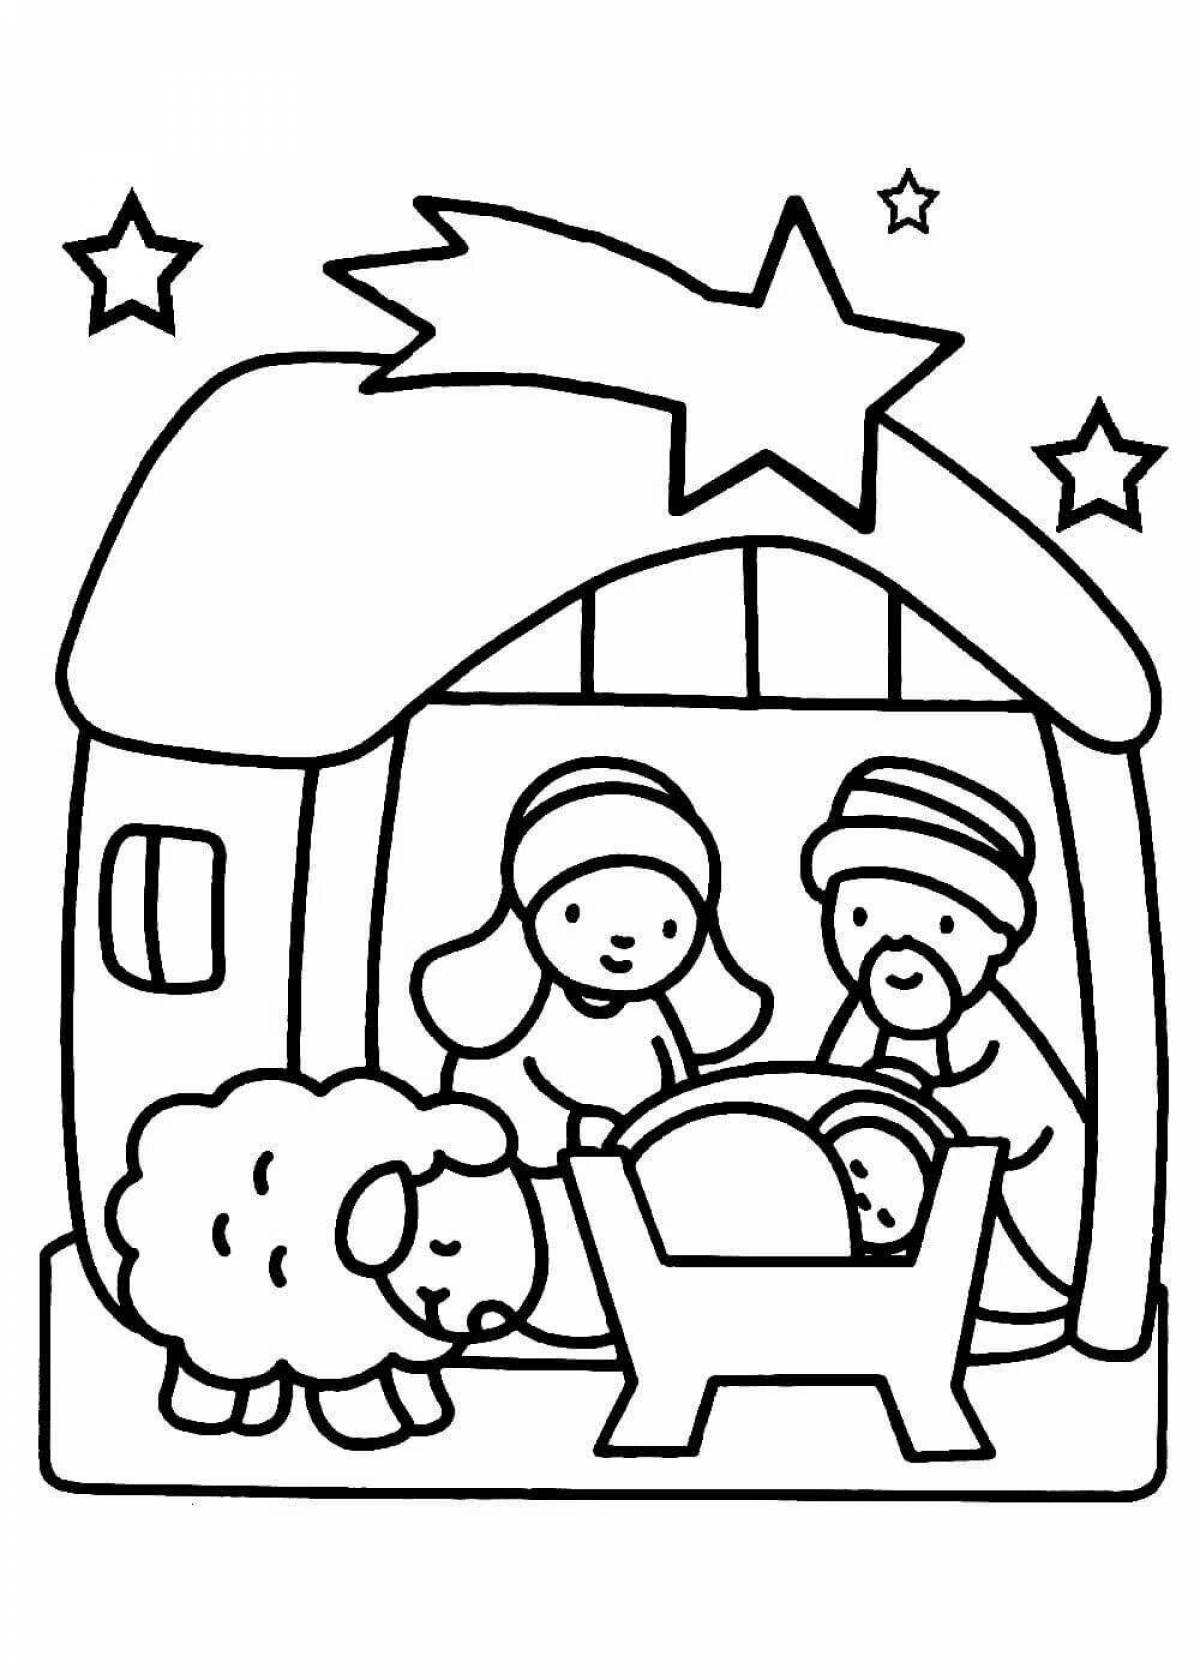 Adorable Christmas coloring book for 3-5 year olds